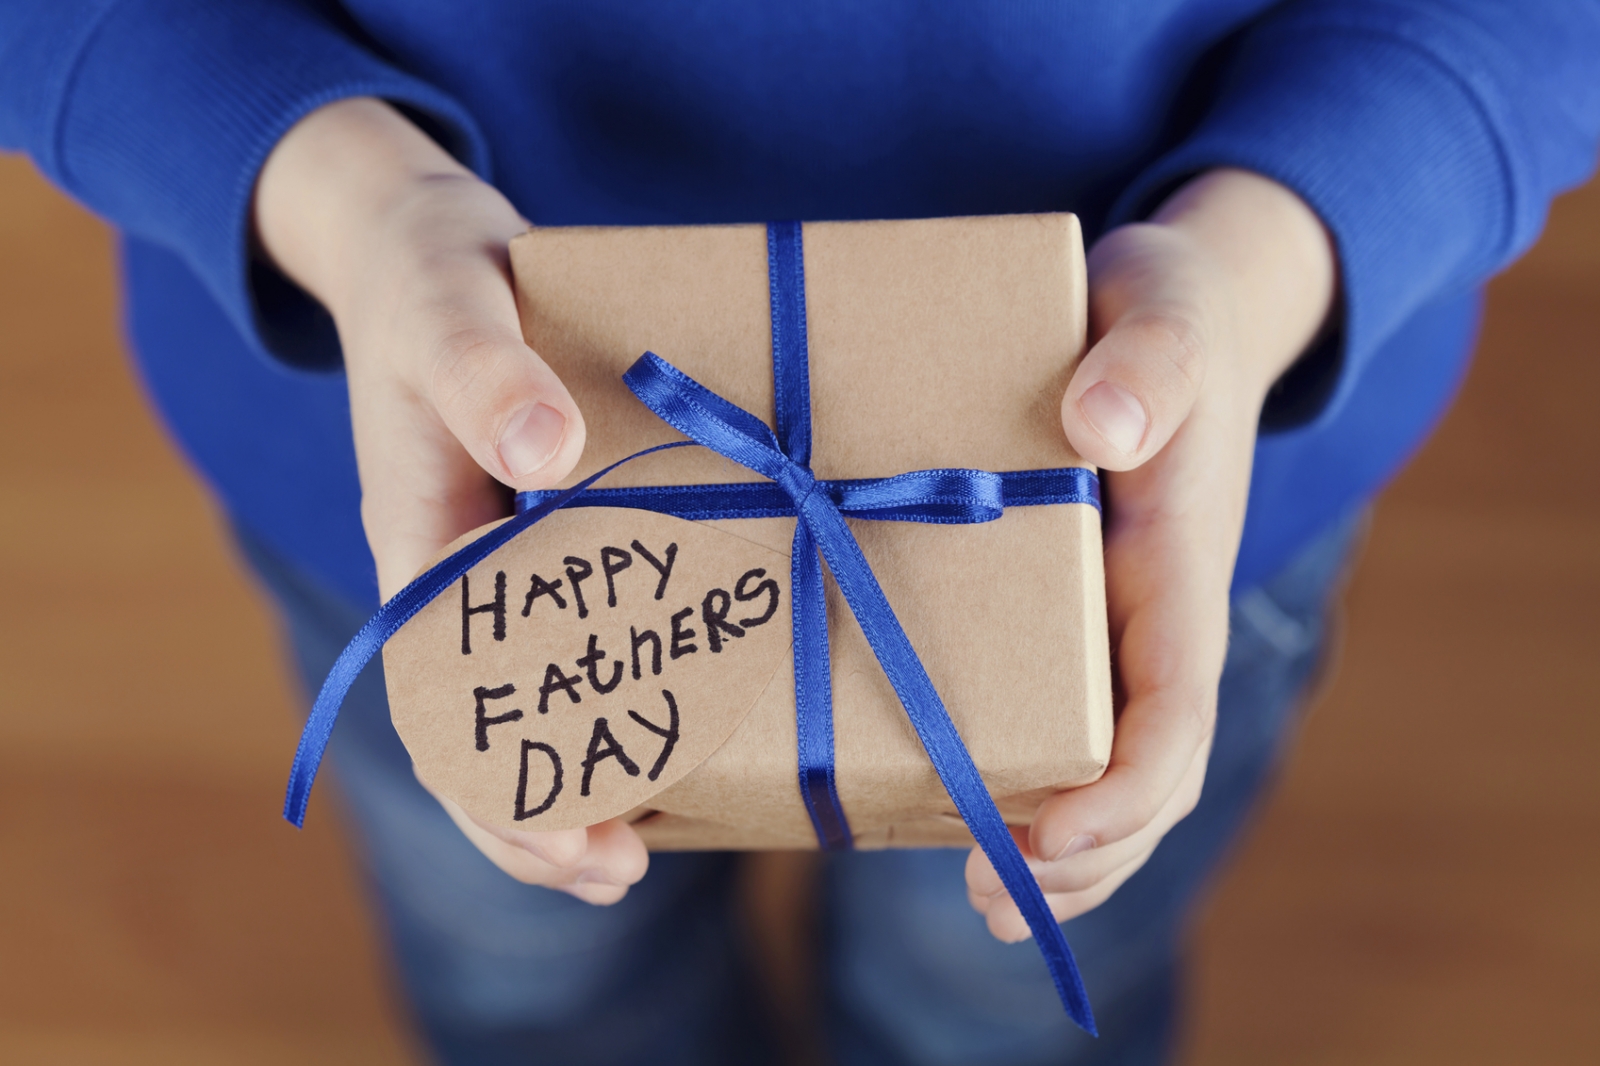 Father's Day 2016: When is it and why do we celebrate it?